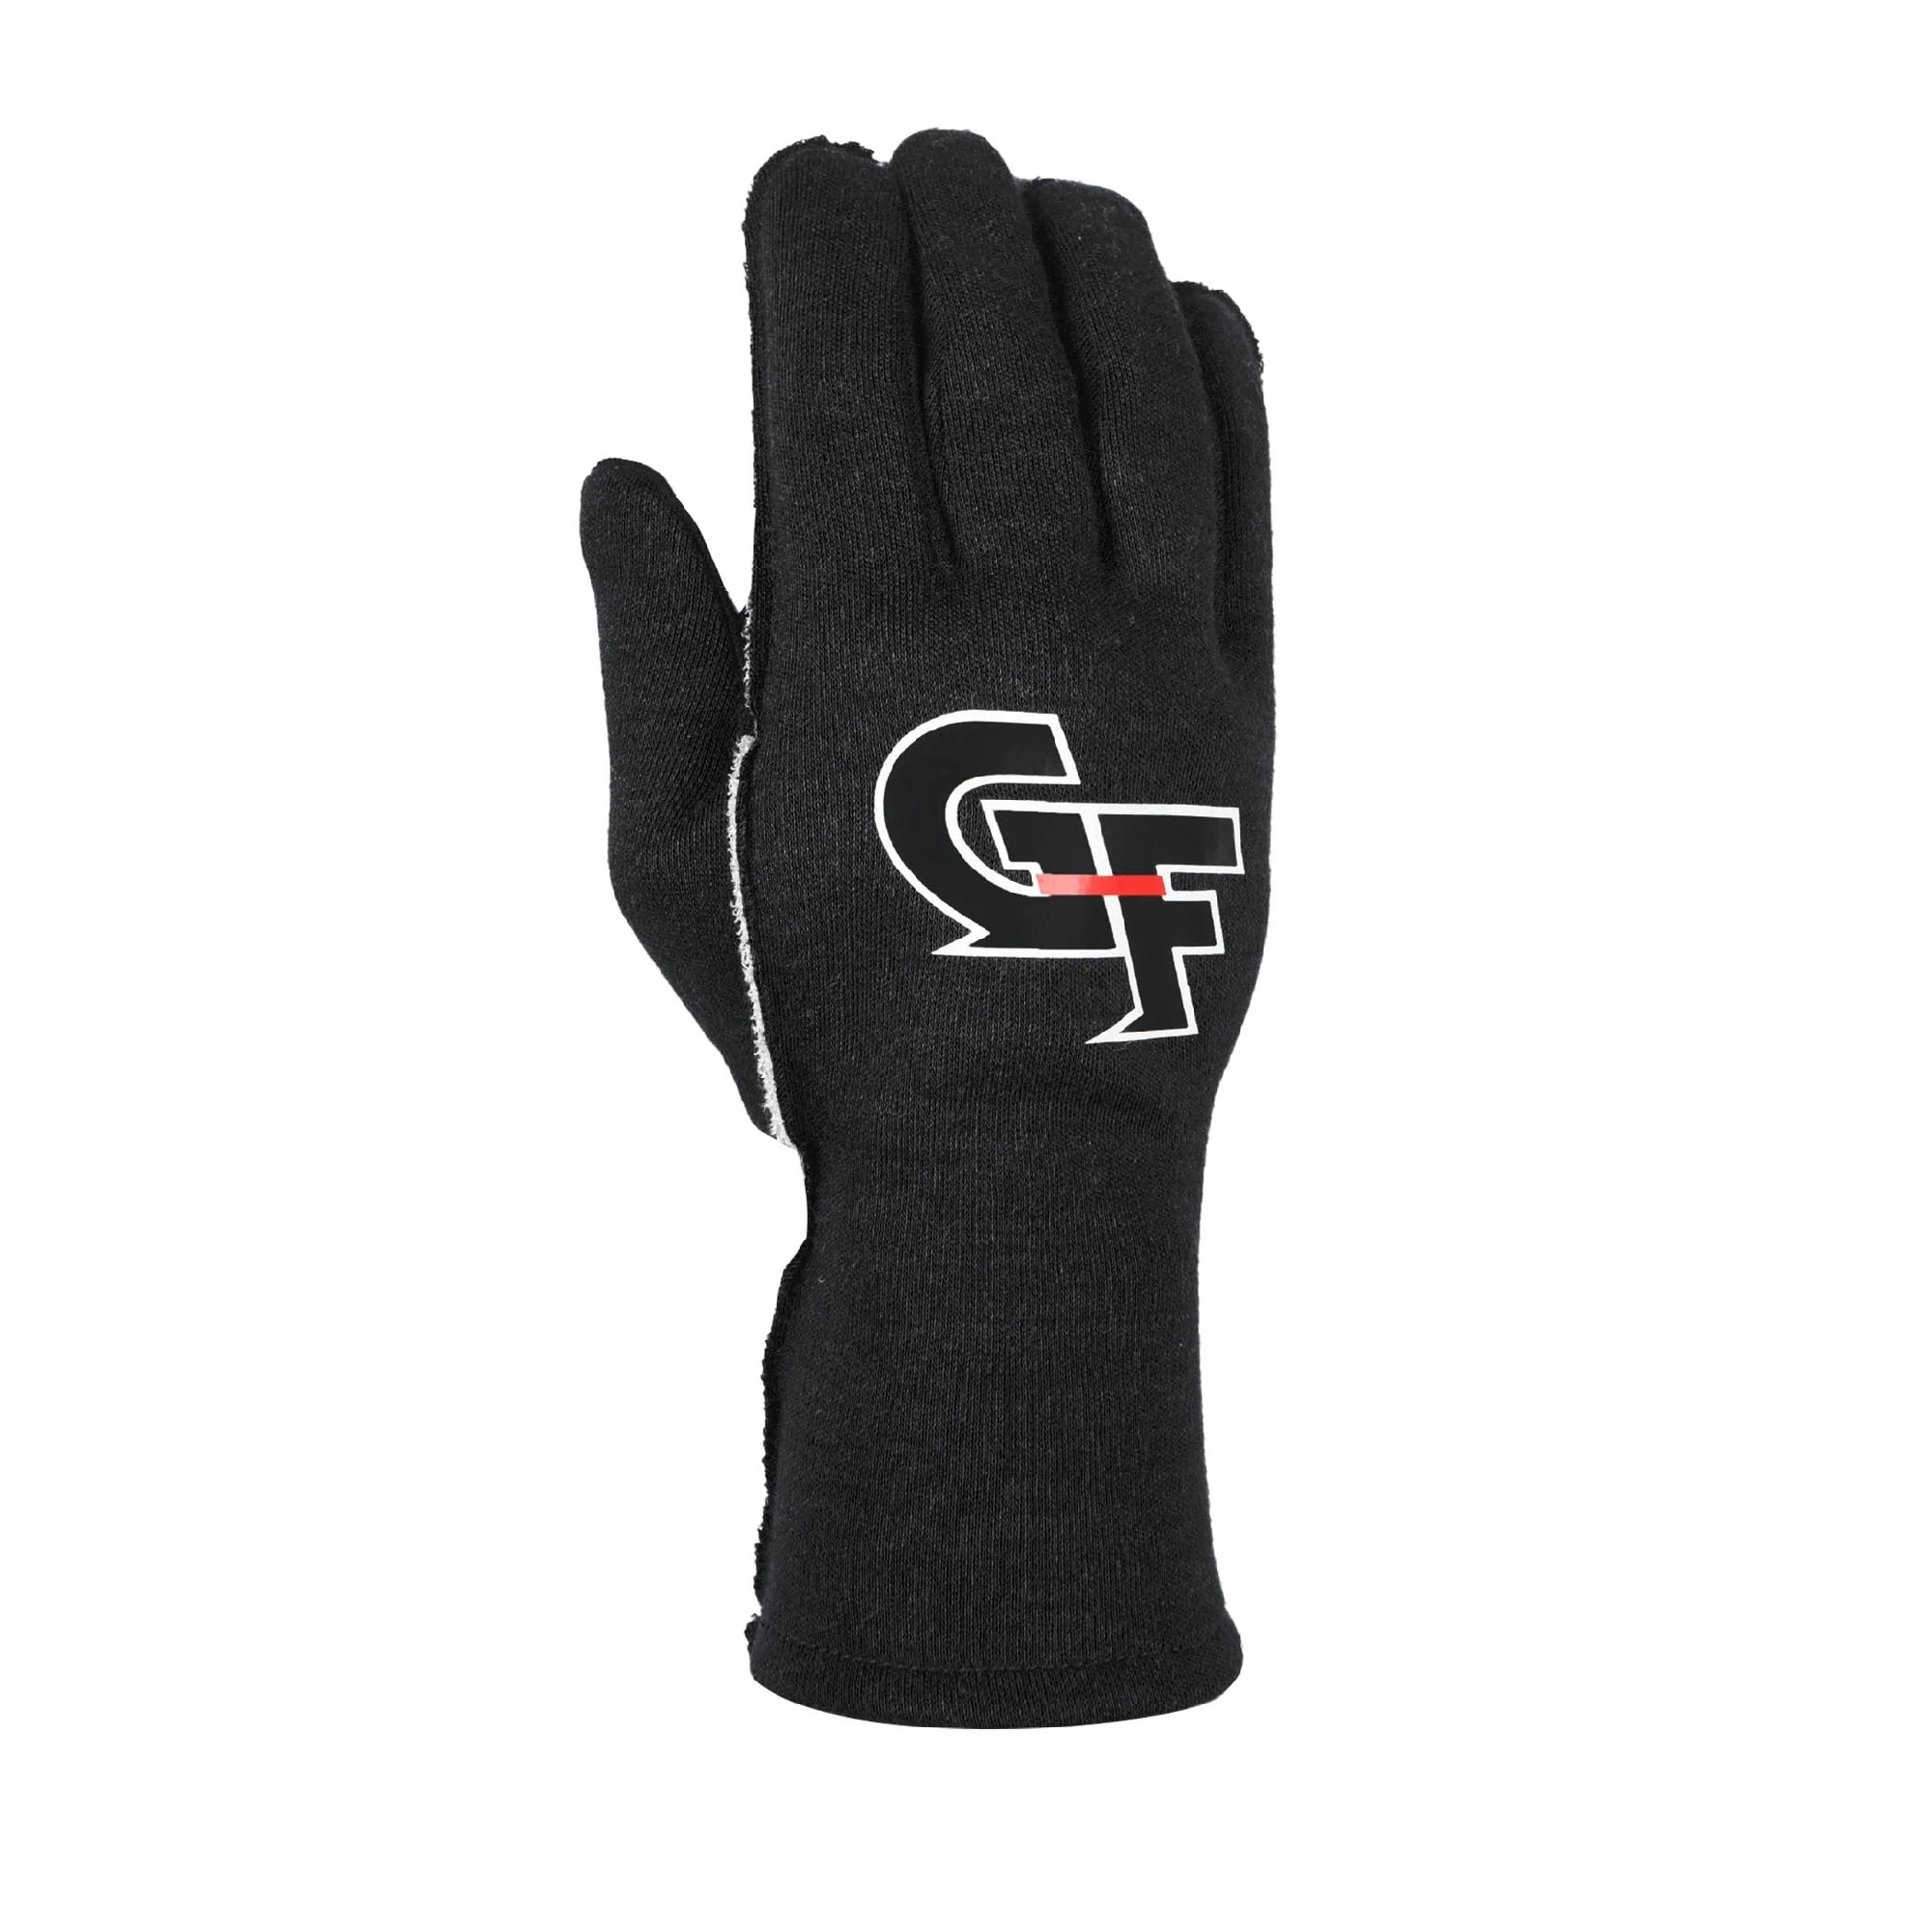 G-Force Racing Gear 54000LRGBK Driving Gloves, G-Limit RS, Double Layer, SFI 3.3/5, Nomex, Black, Large, Pair